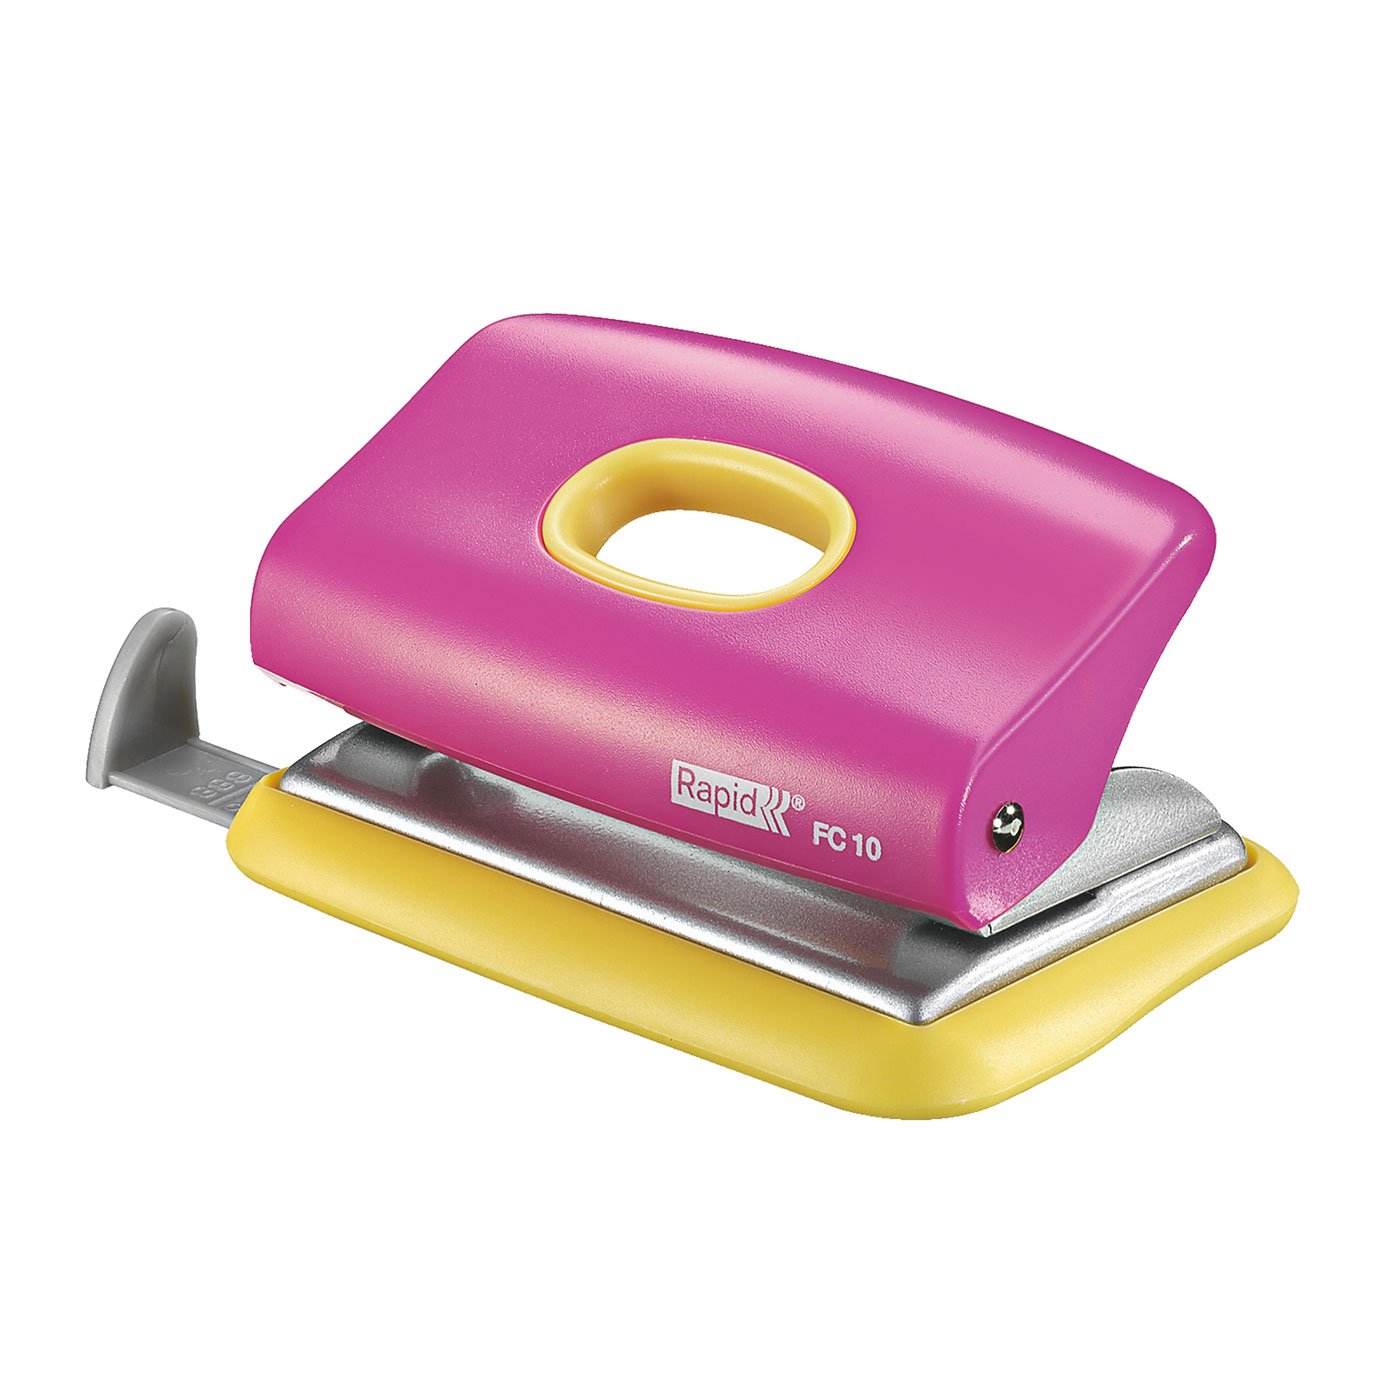 HOLE PUNCH RAPID FC10 FUNKY PINK YELLOW - City Books & Lotto